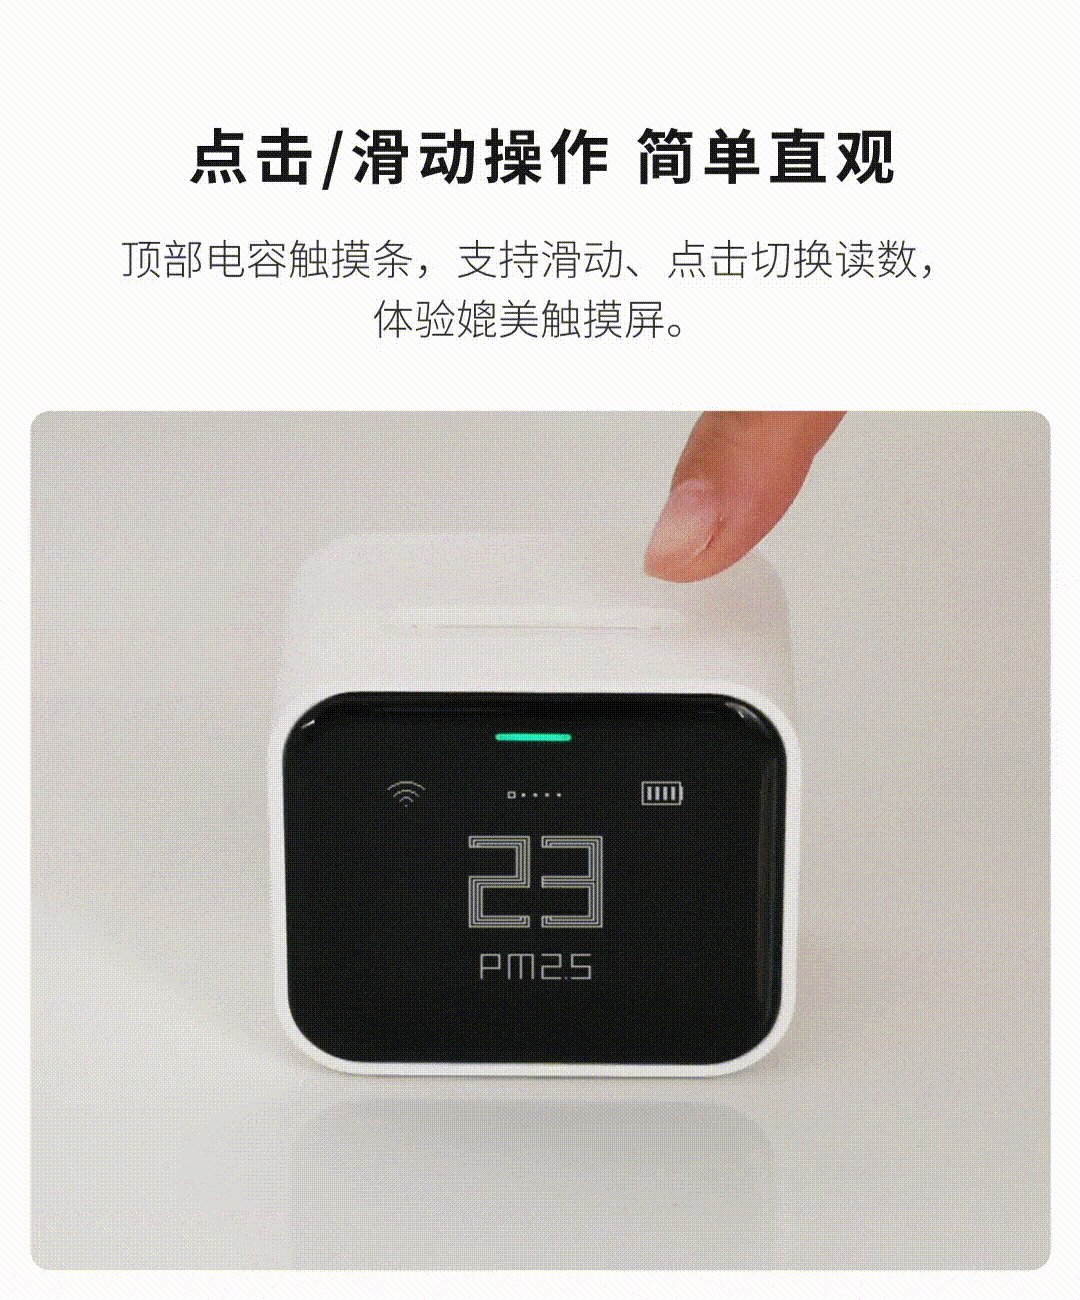 Xiaomi Youpin Crowdfunding Qingping Air Detector Lite: Five data items are done in one